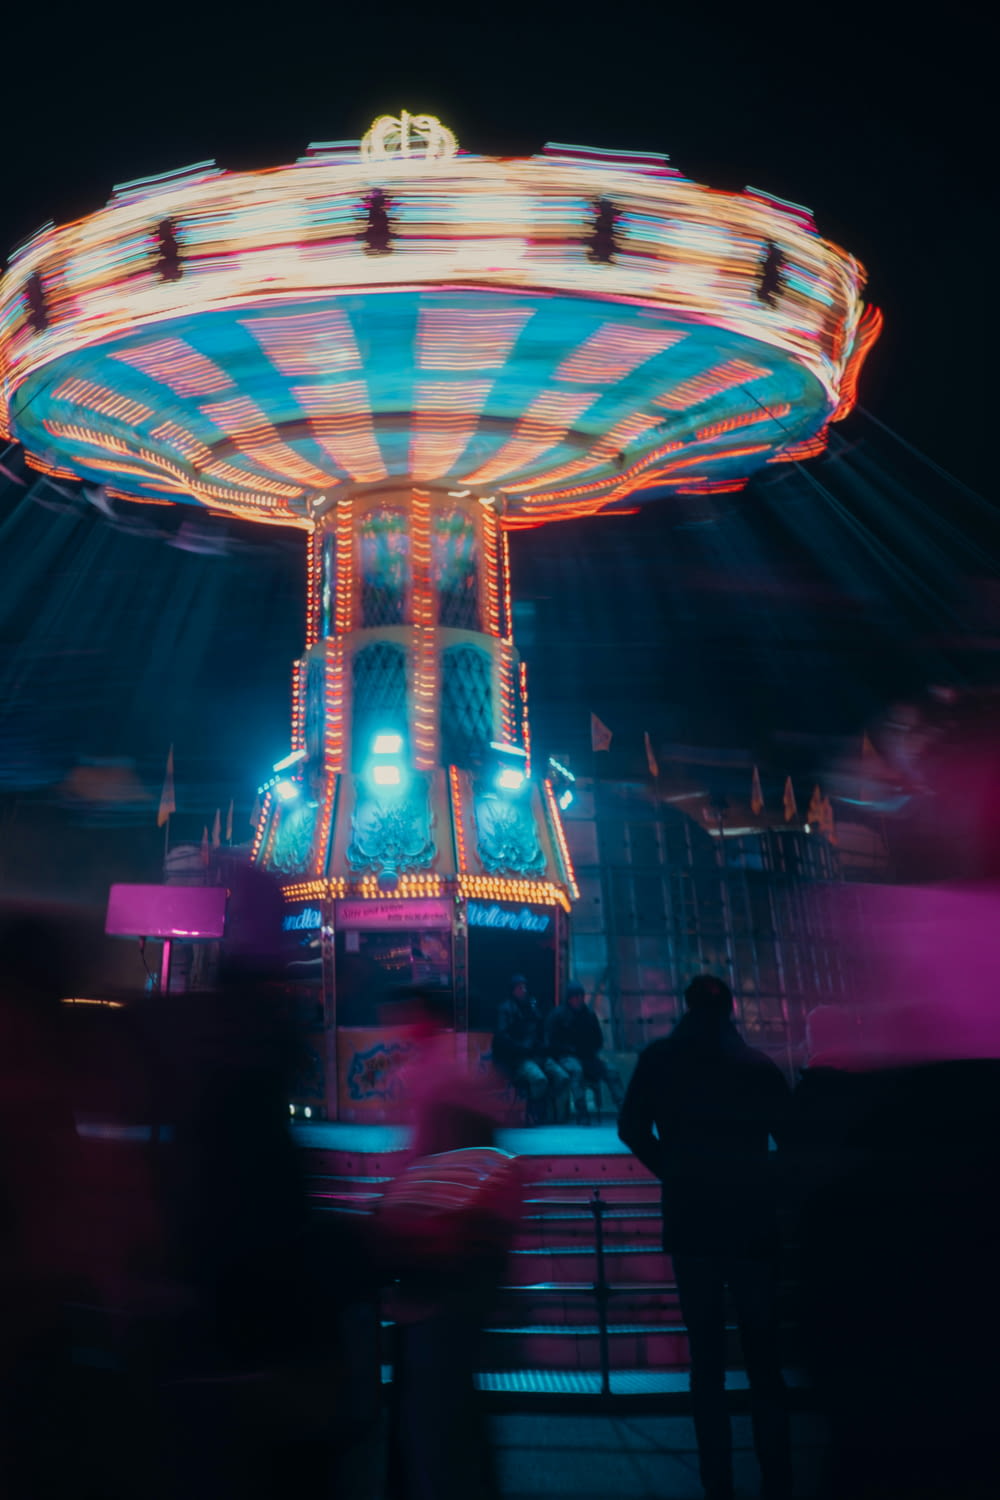 a carnival ride at night with people standing around